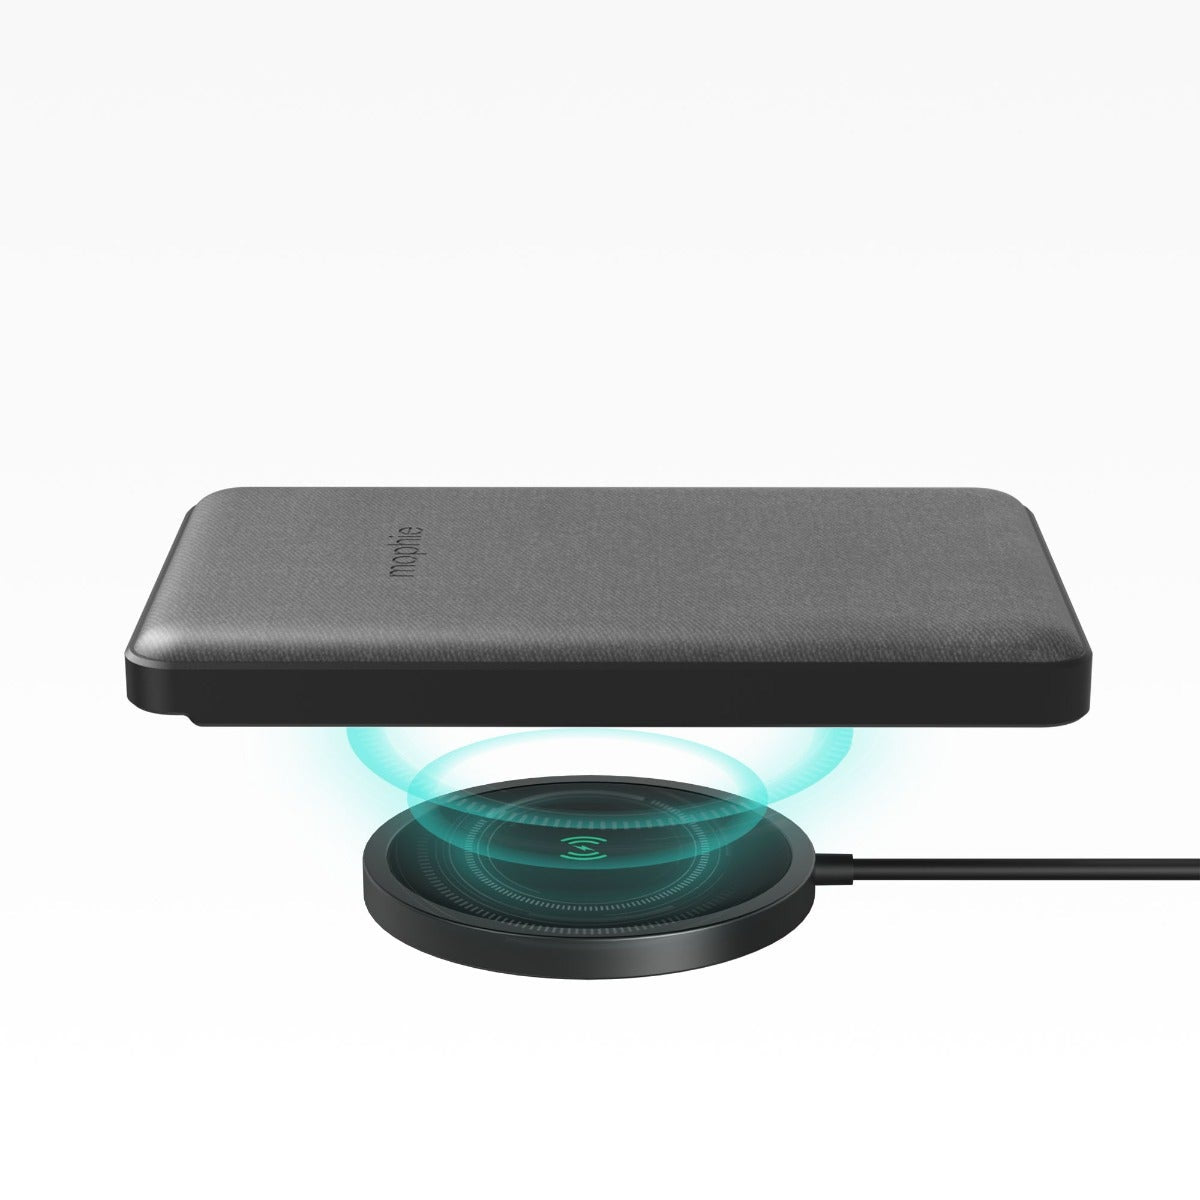 snap+ juice pack mini - Mophie (MagSafe Compatible) - Storming Gravity